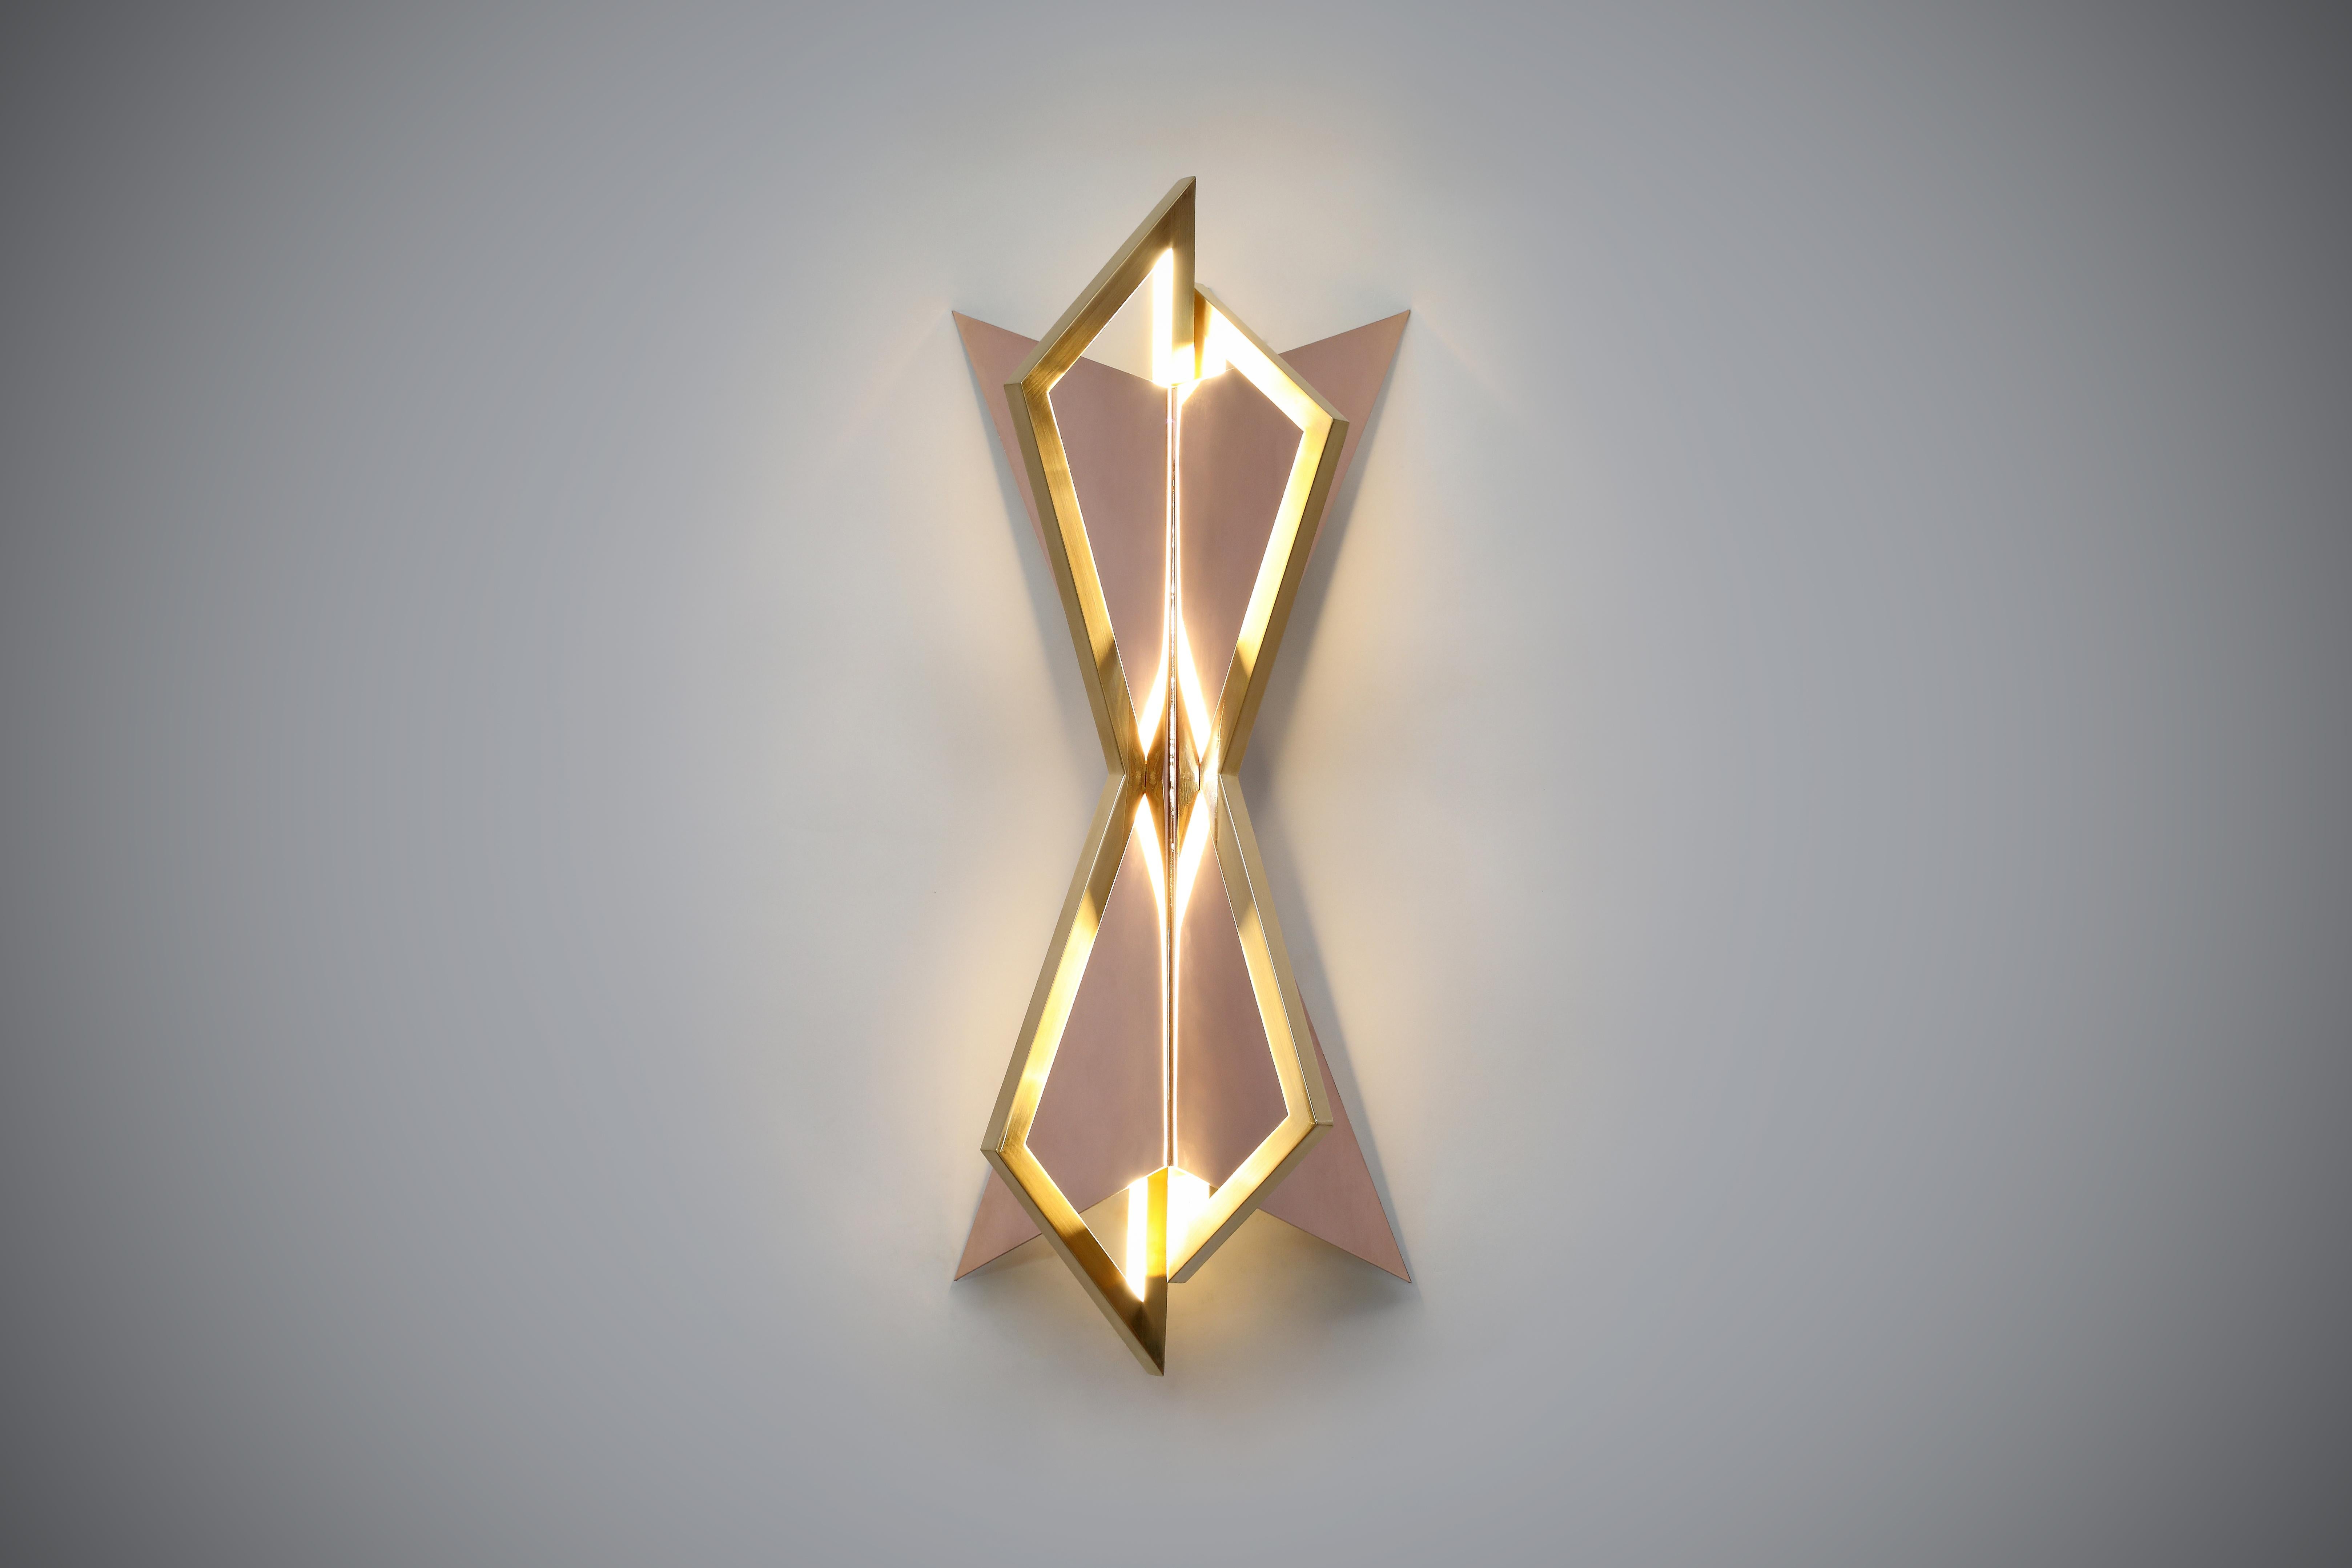 Handcrafted and finished in 24ct gold and rose gold, this exceptional wall light is the epitome of luxury. With its clean-cut lines and polished finish, this is one of our favourite works of art. There is the option to choose from our standard